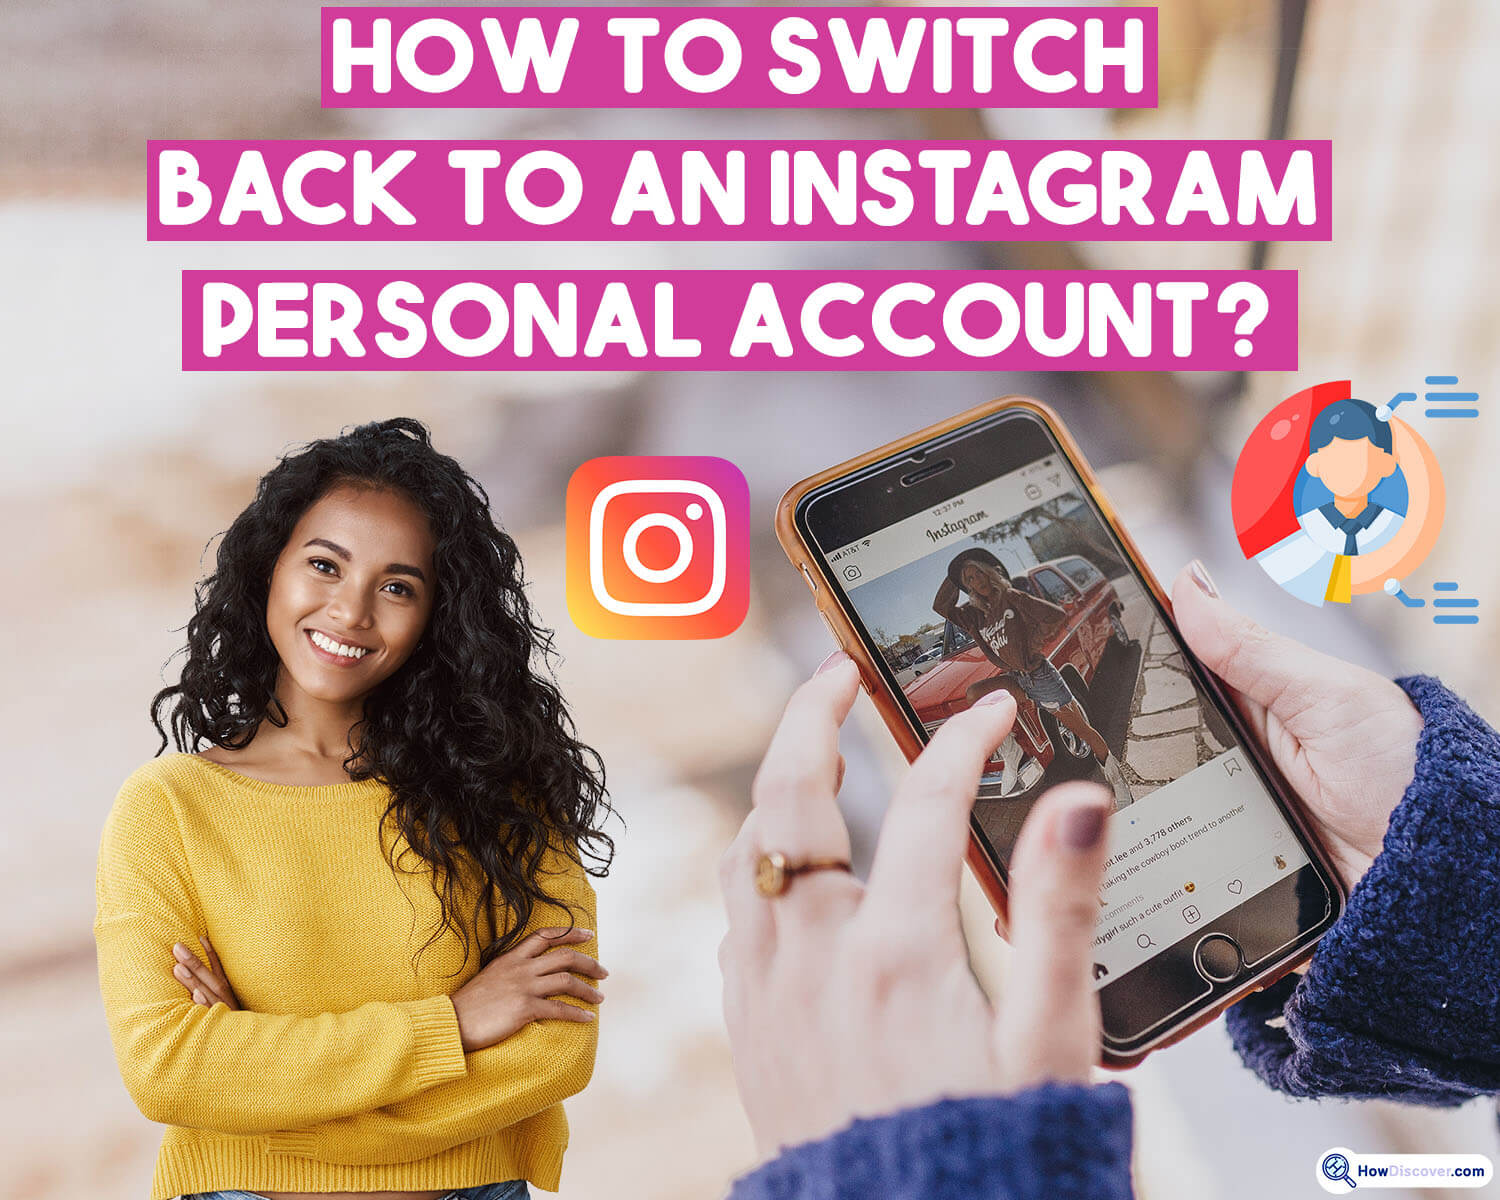 How To Switch Back To an Instagram Personal Account